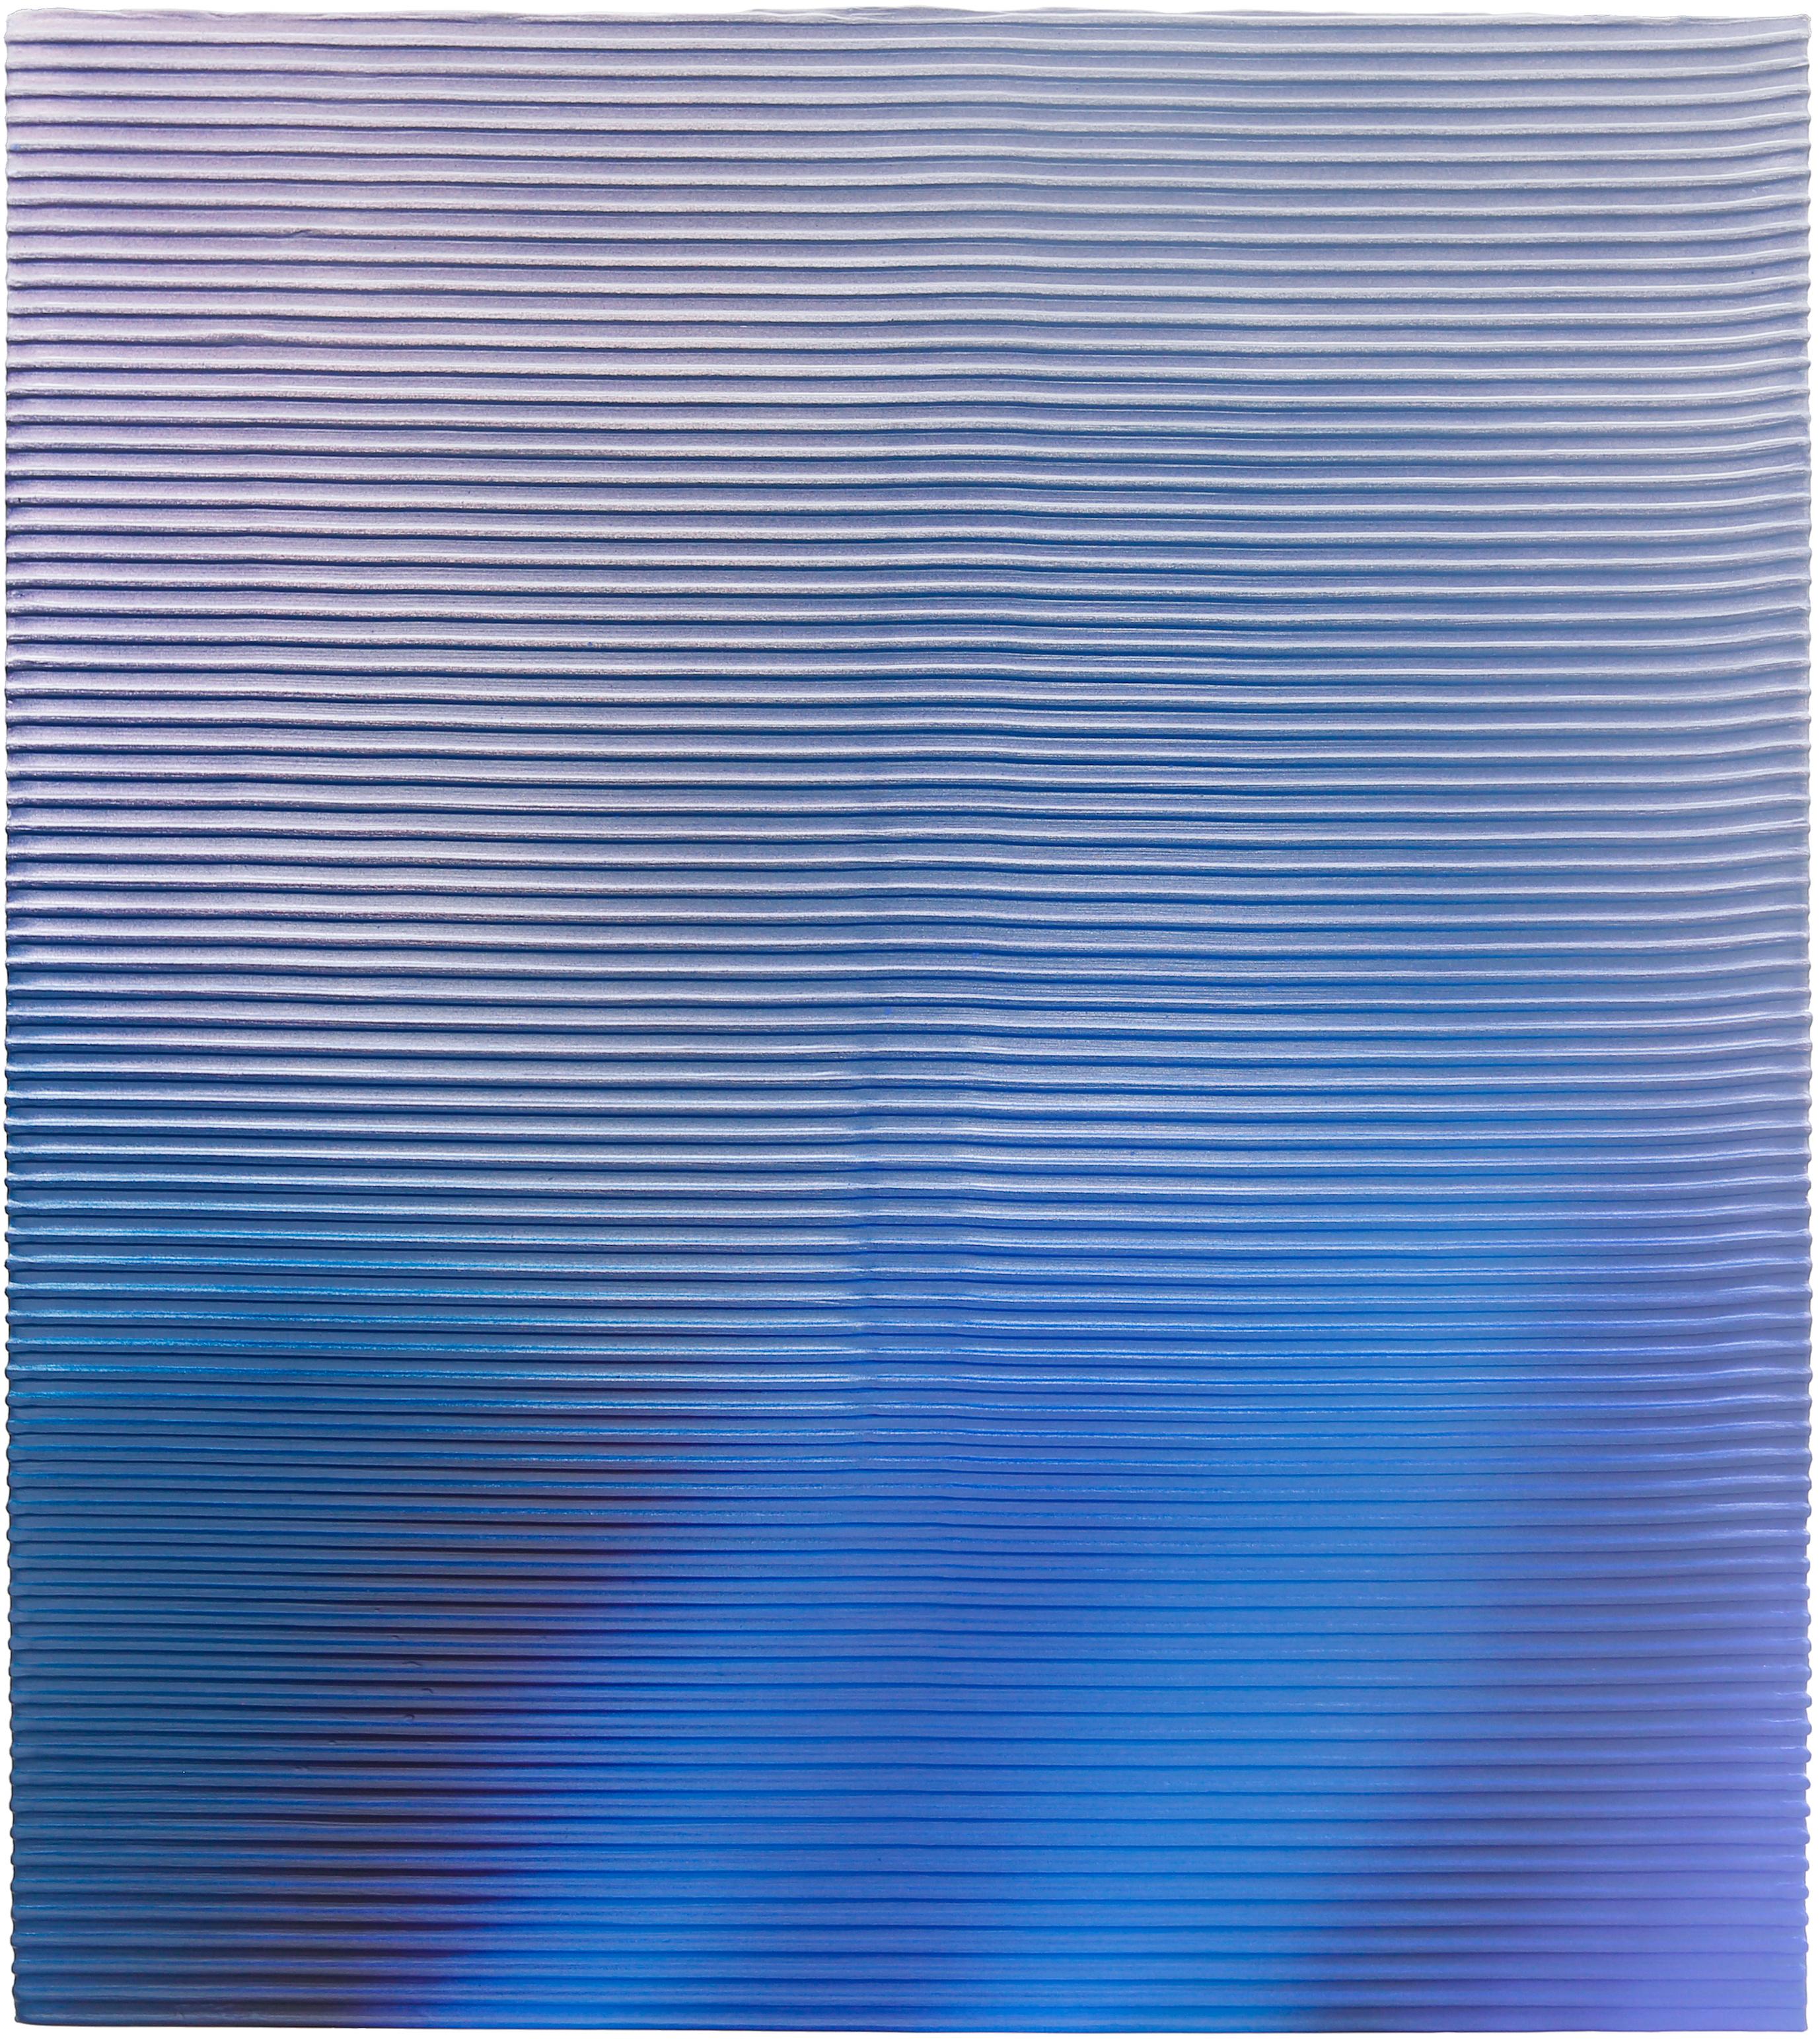 Zdenek Konvalina Abstract Painting - Display No 34 - Striped, geometric, white and blue, minimal, abstract painting 